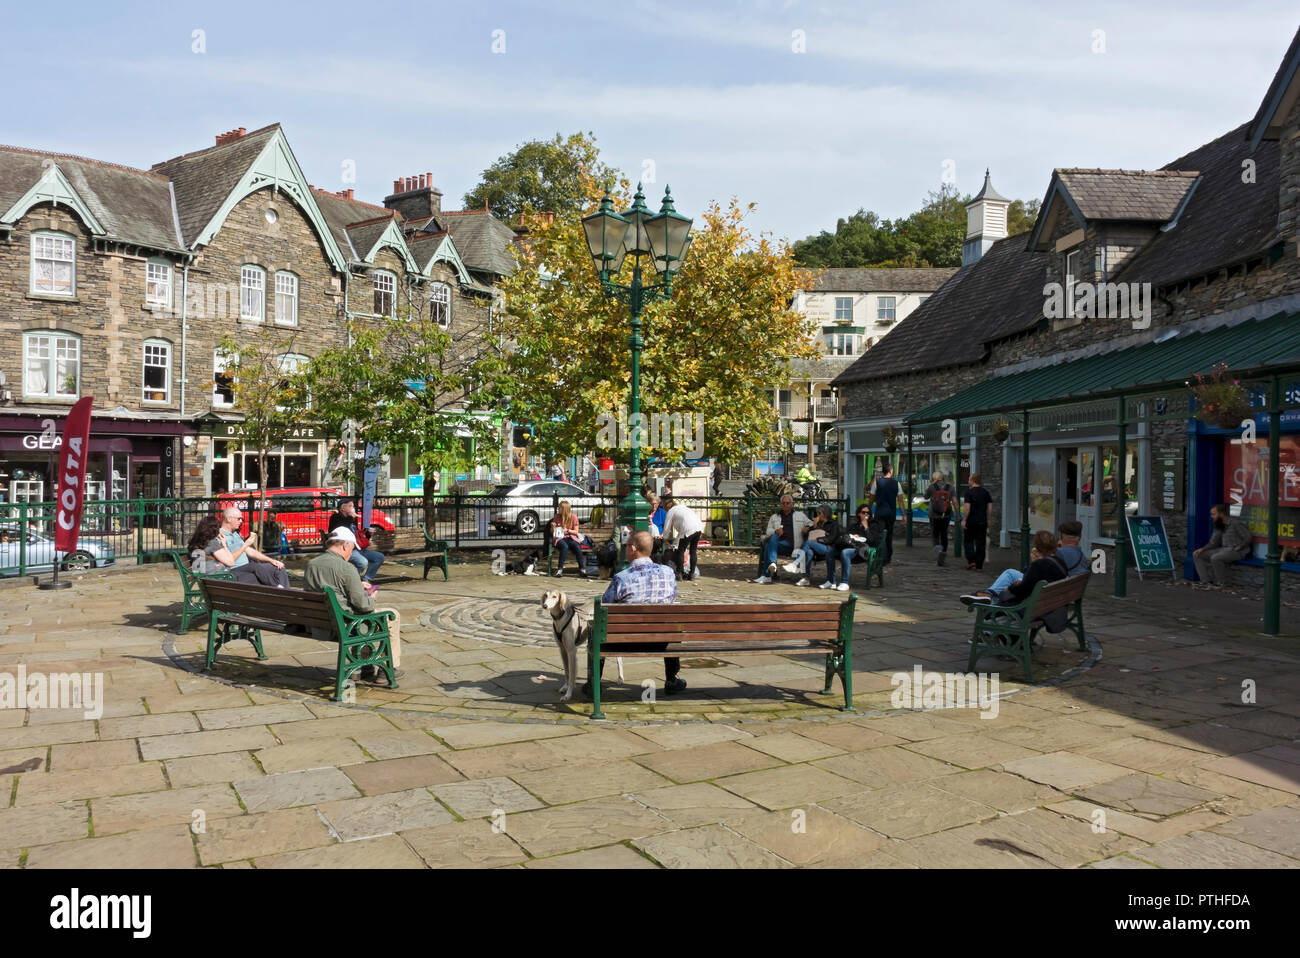 People tourists visitors relaxing sitting outside in the town centre in summer Ambleside Cumbria England UK United Kingdom GB Great Britain Stock Photo